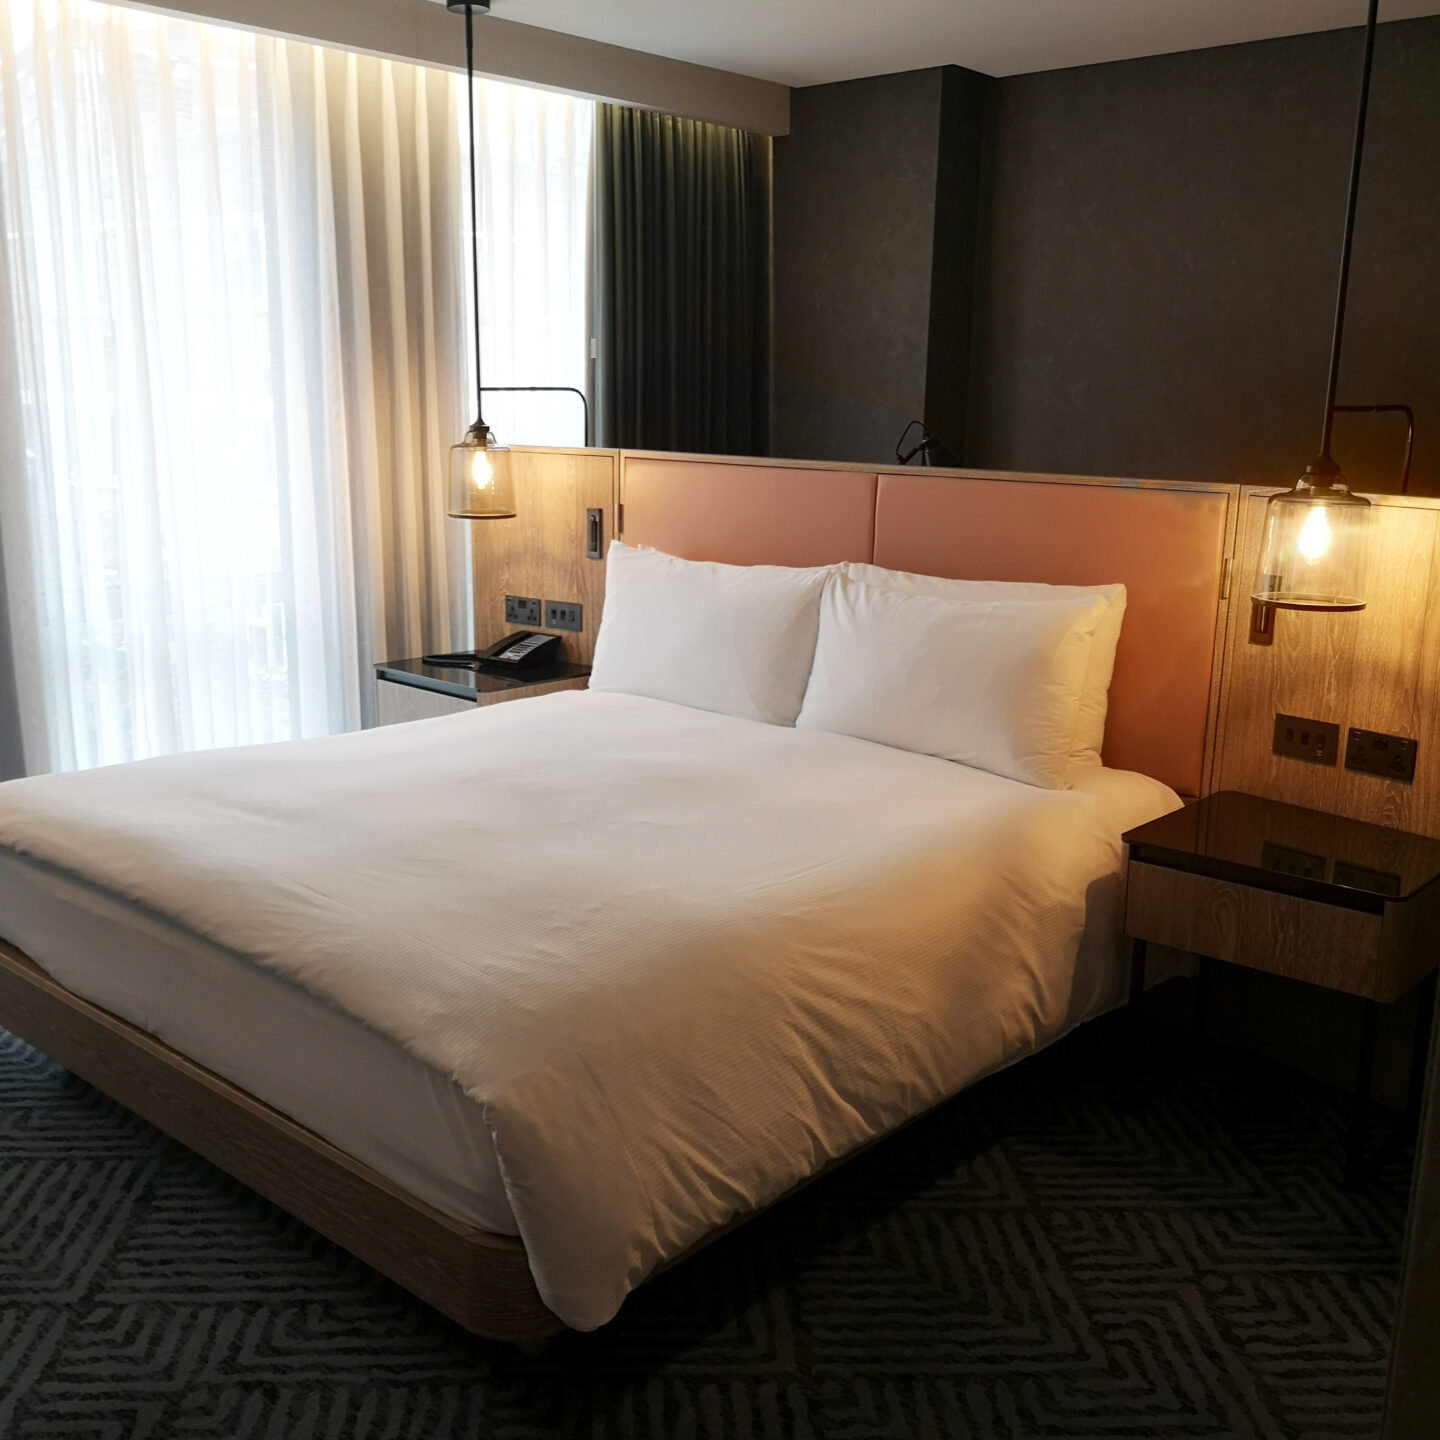 Hilton London Bankside, South Bank, Hotel Review, Family Staycation, London Hotel, Hitlon, Family-Friendly, UK Staycation, London Break, Family Break, The Frenchie Mummy, Family Stay 